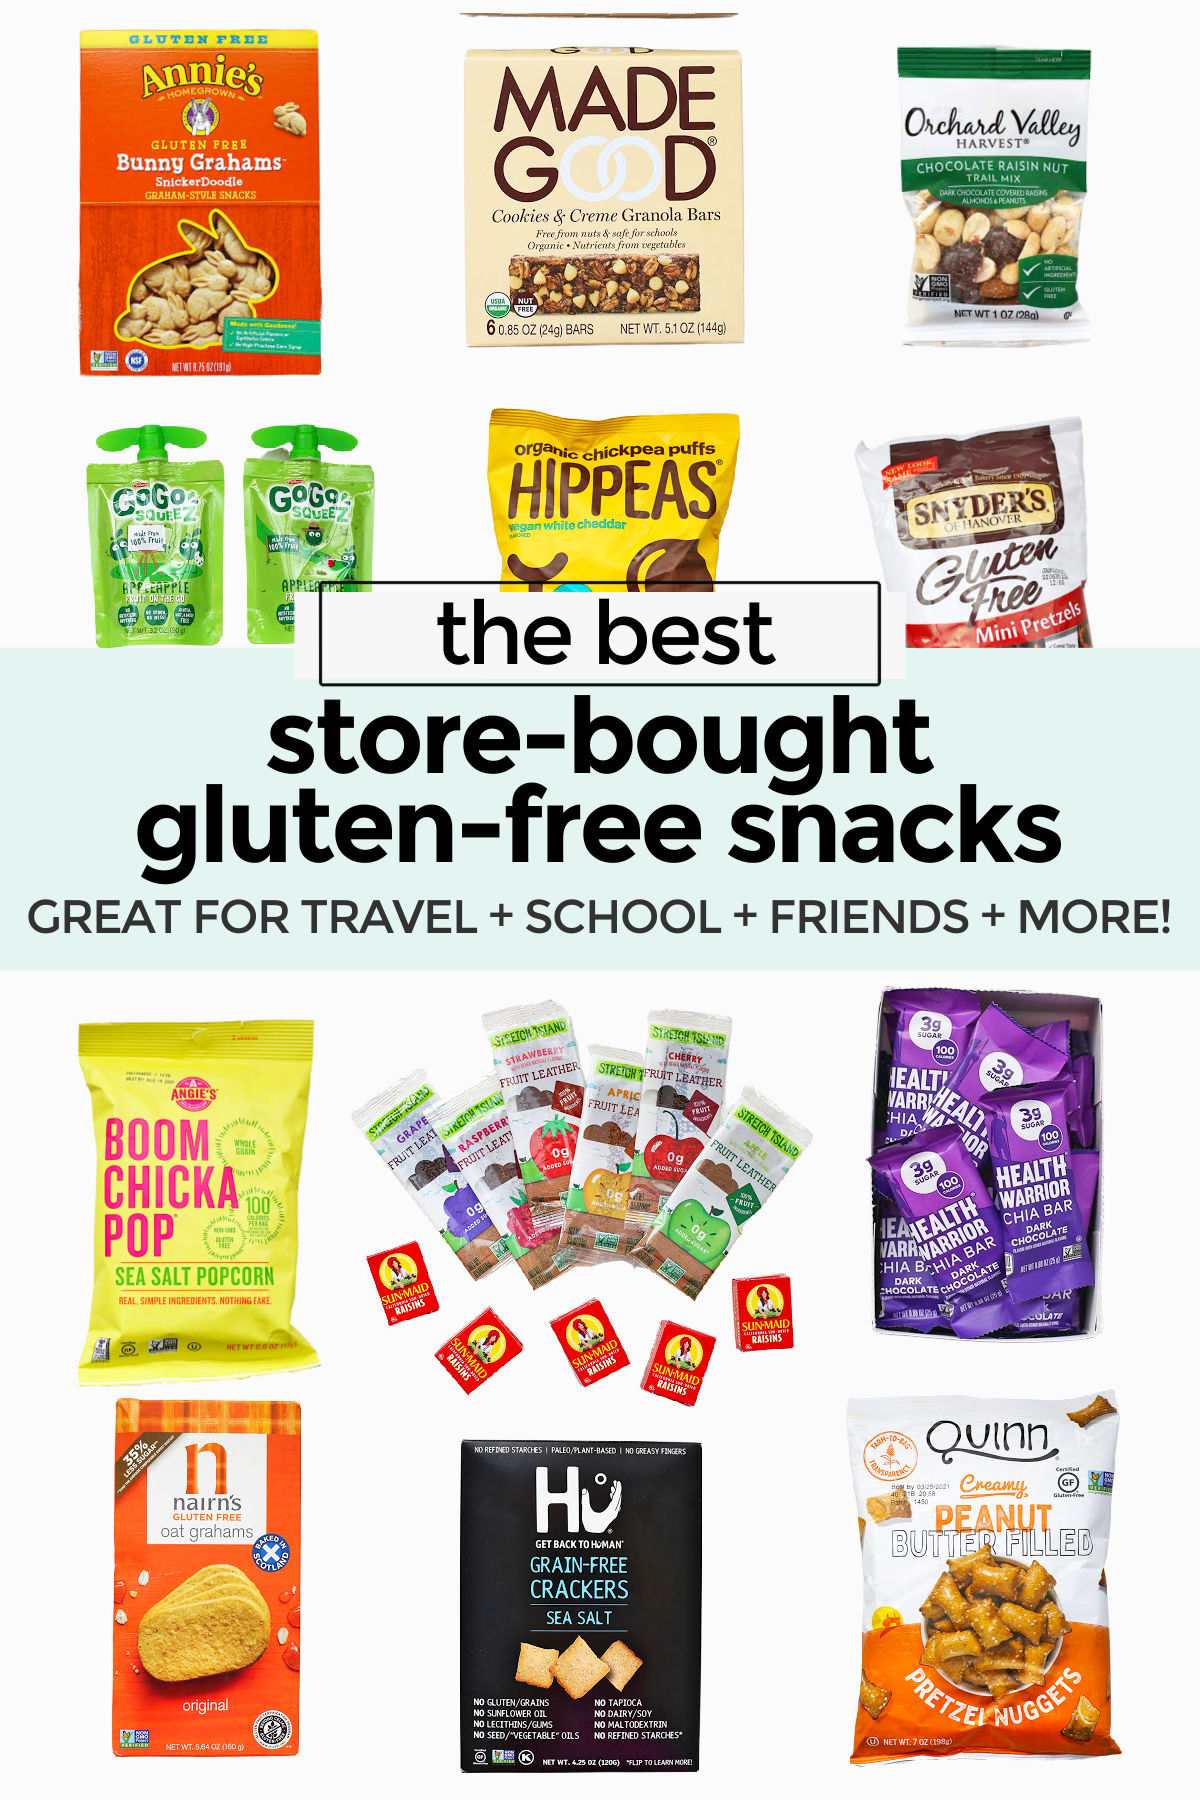 Our Favorite Store-Bought Gluten-Free Snacks For Kids. Easy to buy gluten-free snacks for kids. Perfect for school, travel, taking on the go, or keeping on hand for friends and family! // Gluten-Free Snacks // Gluten-Free Snack Ideas // Gluten-Free School Snacks // Travel Snacks // Kids Snacks #snacks #travel #school #glutenfree